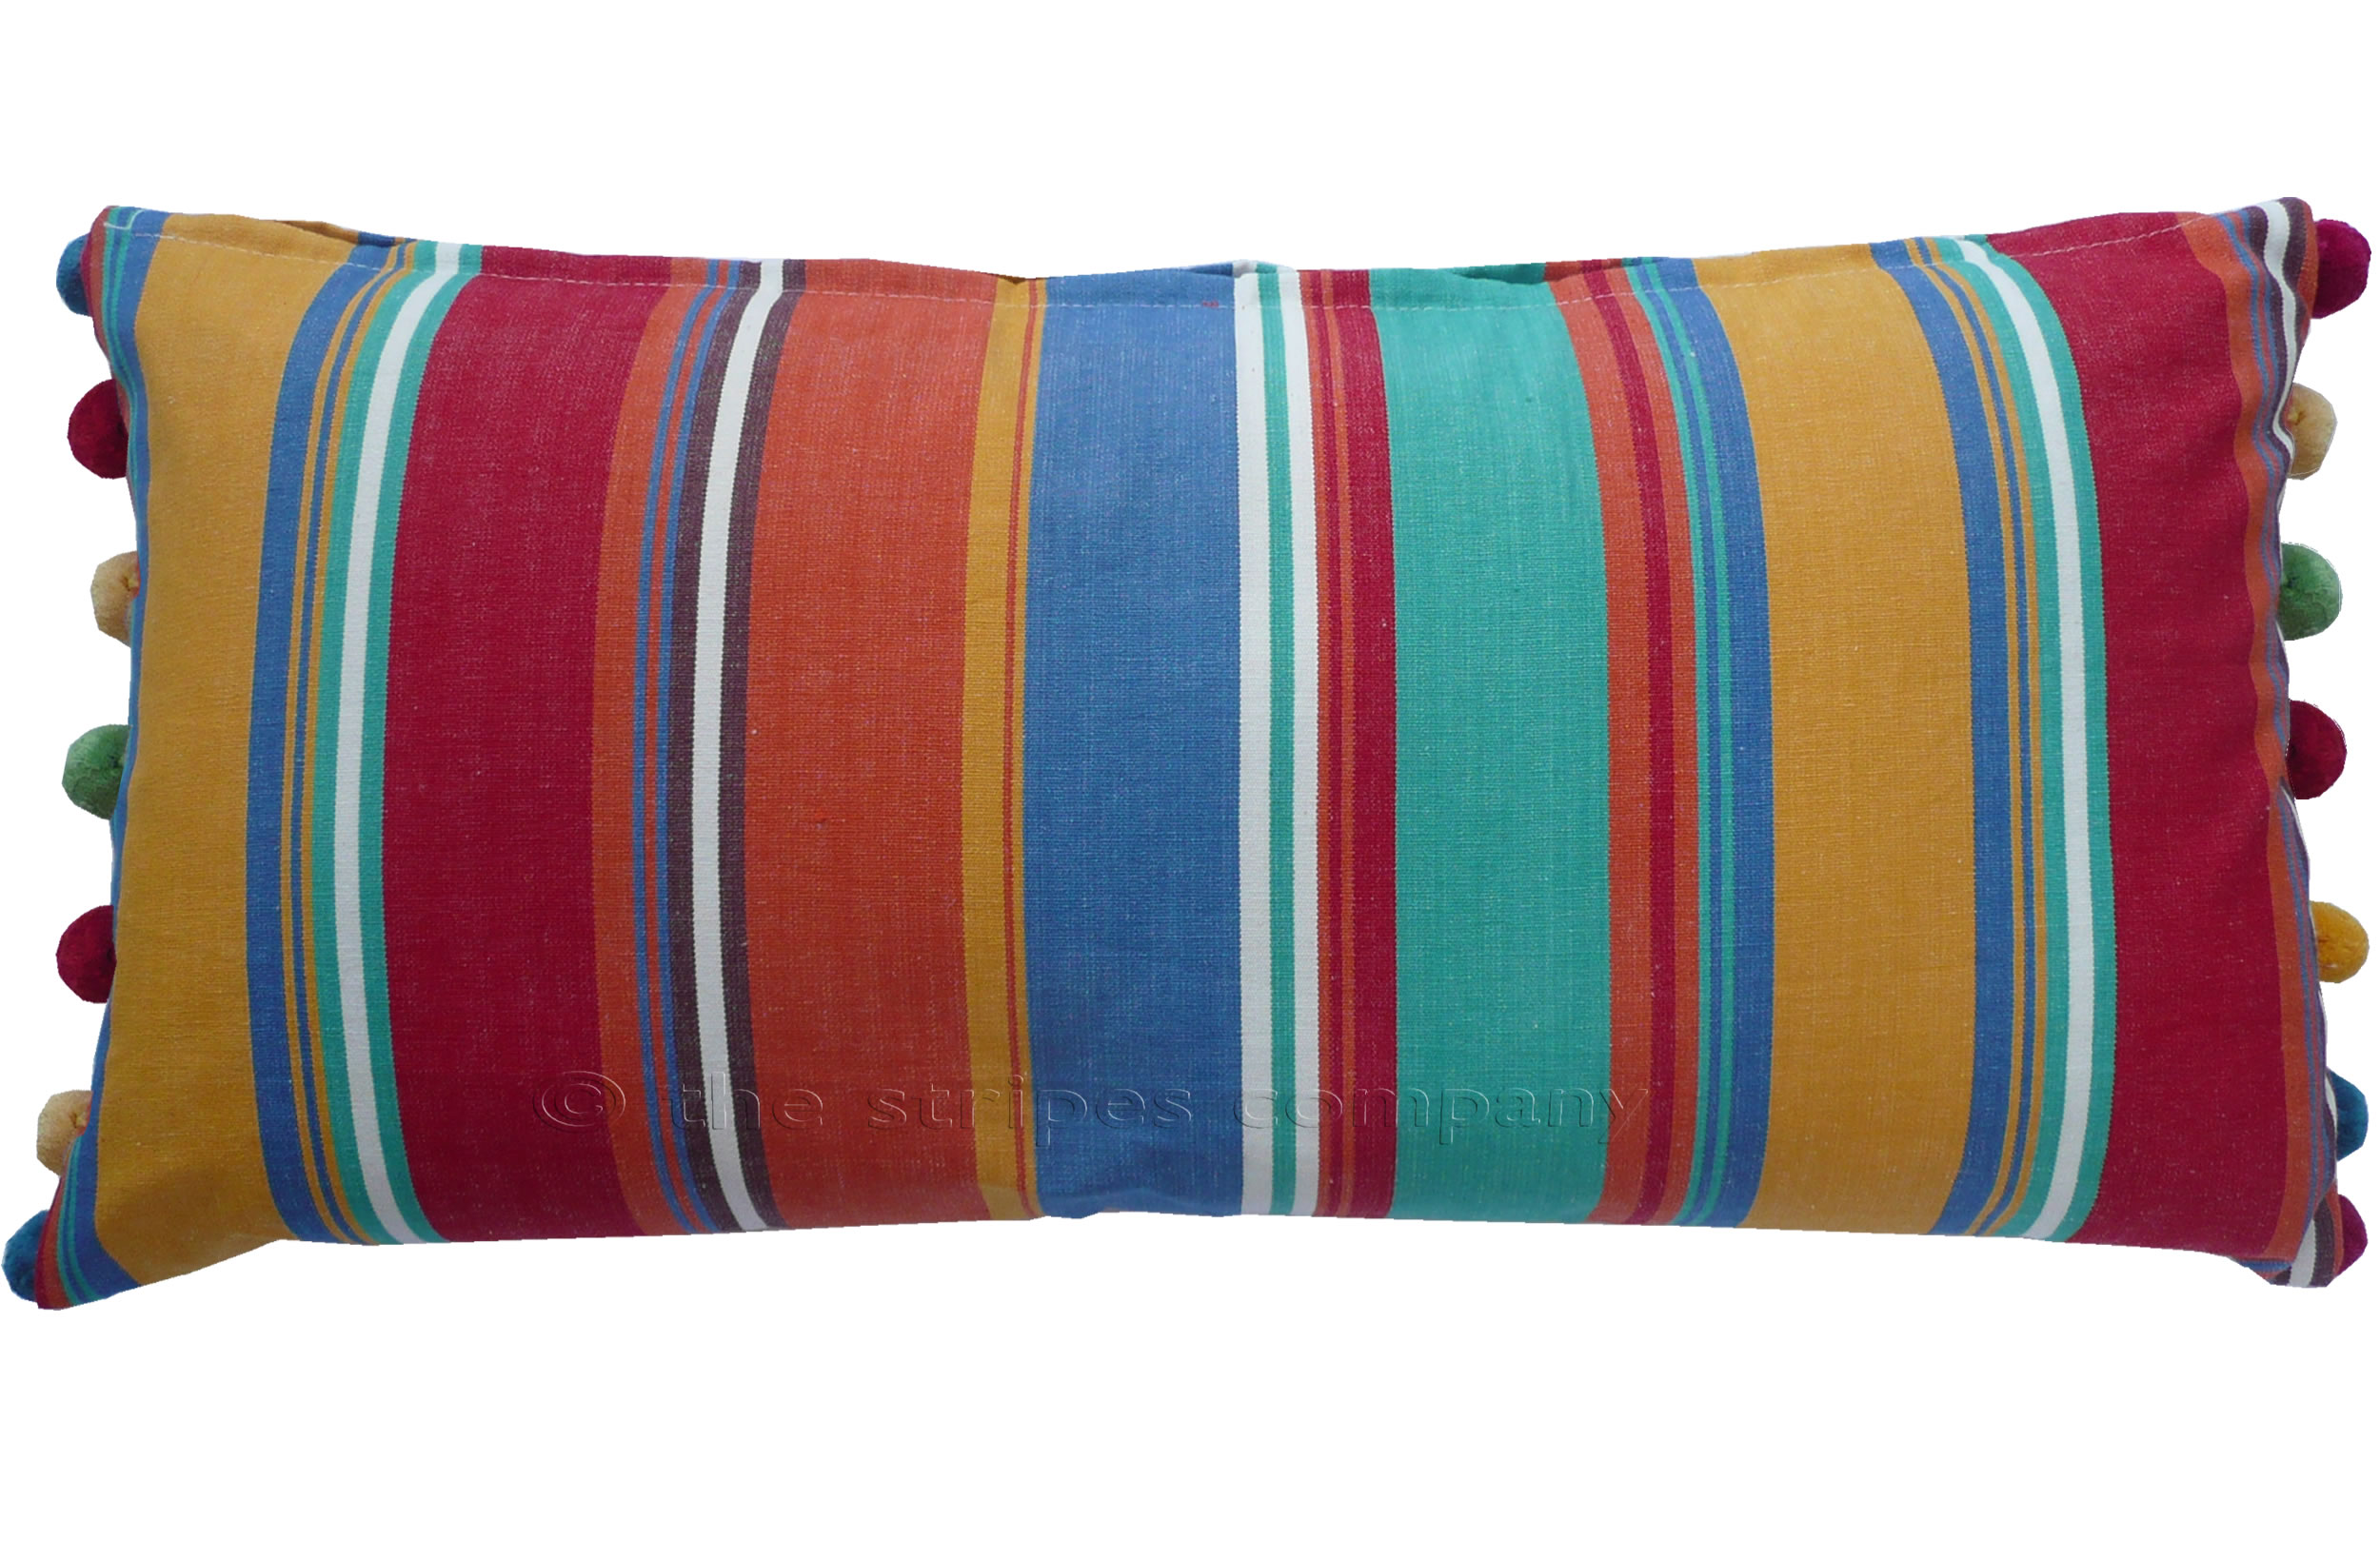 Orange, Blue, Jade Green, Yellow, Red Striped Oblong Cushions with Bobble Fringe